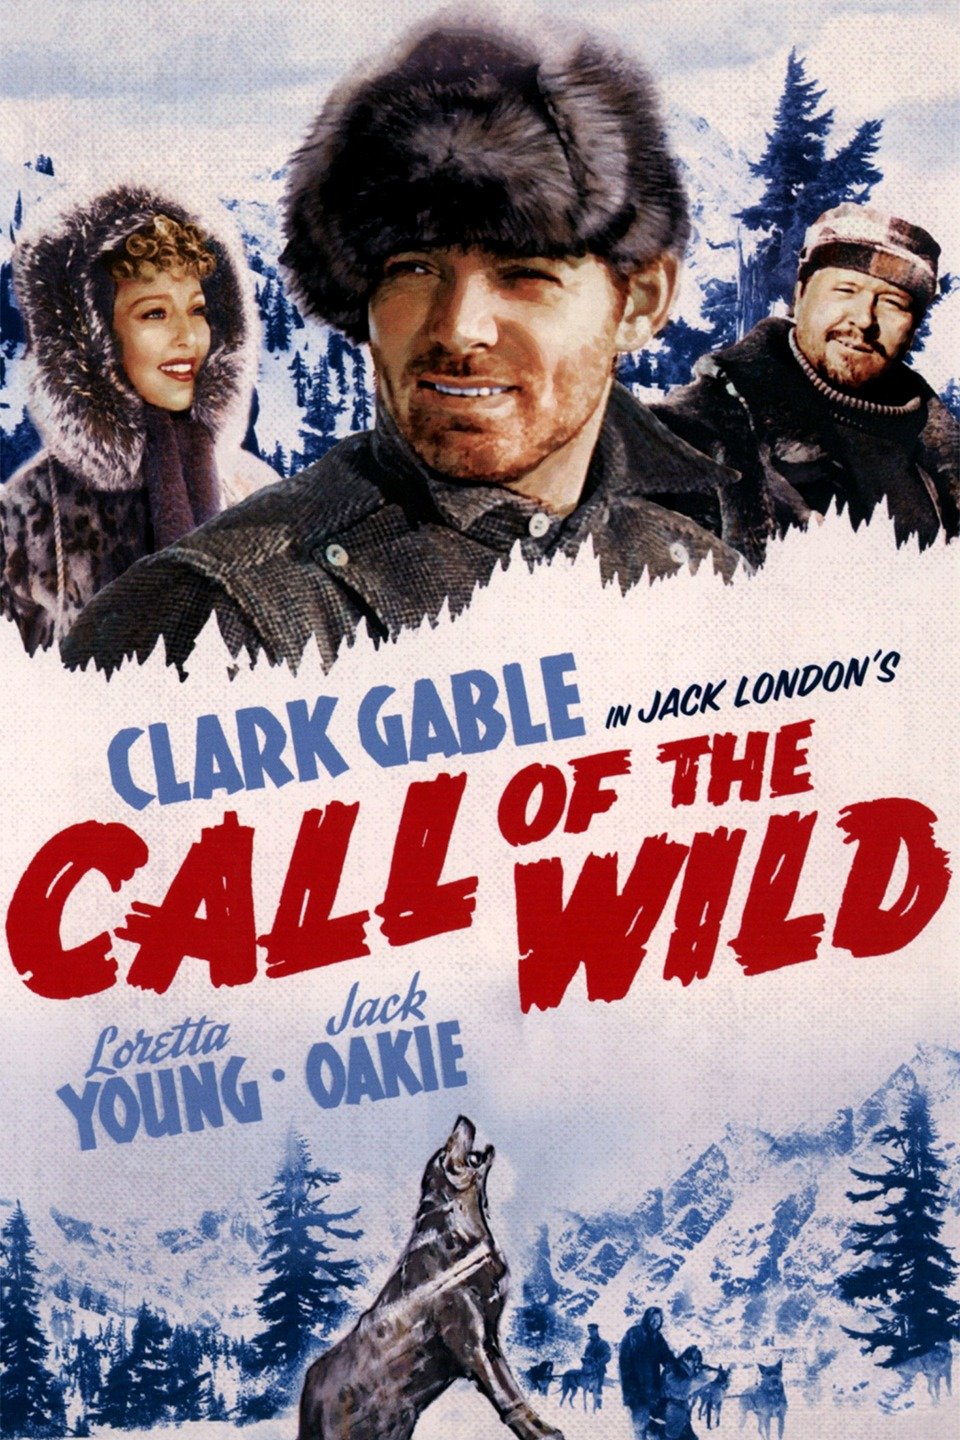 Image result for The Call of The Wild starring Clark Gable and Loretta Young, from 1935